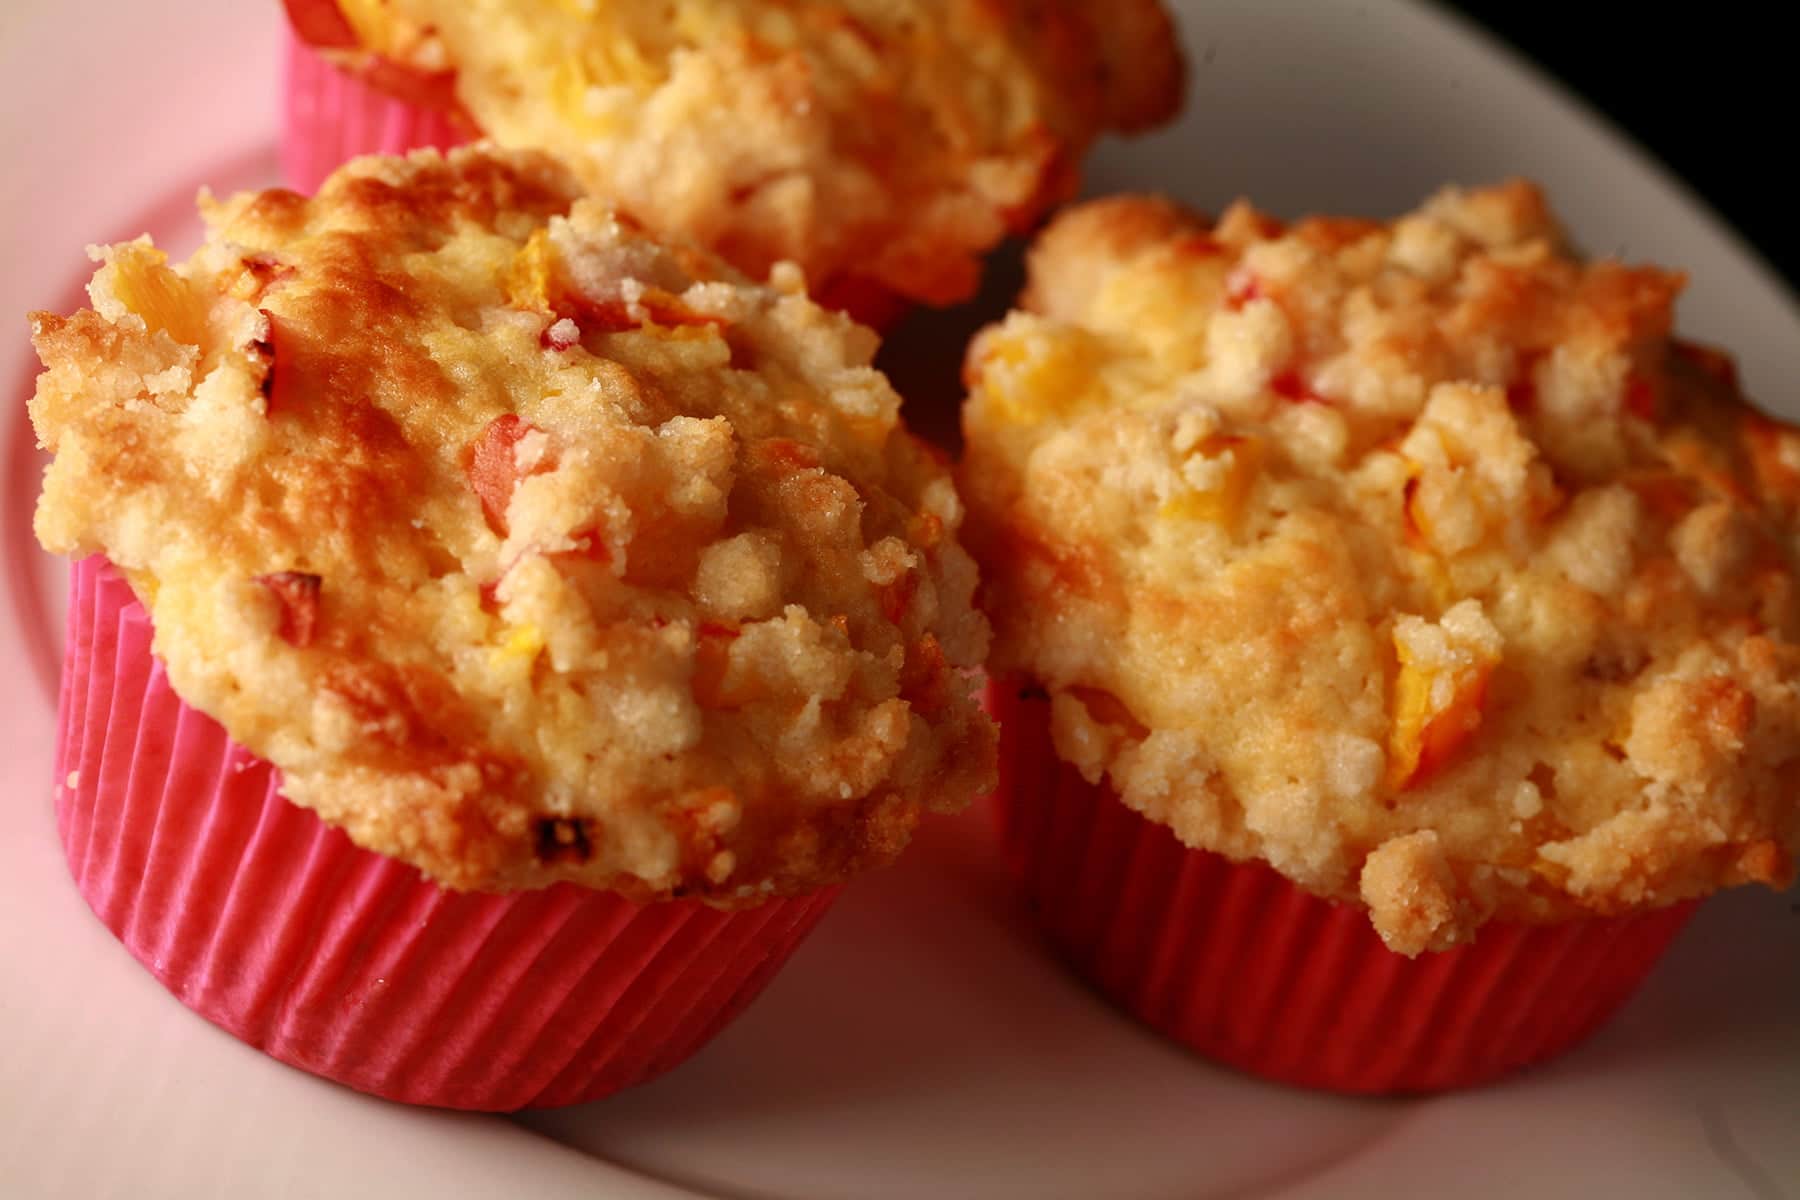 3 Peach cobbler muffins on a white plate. The muffins have small pieces of peach and streusel on top, and each has a pink liner.